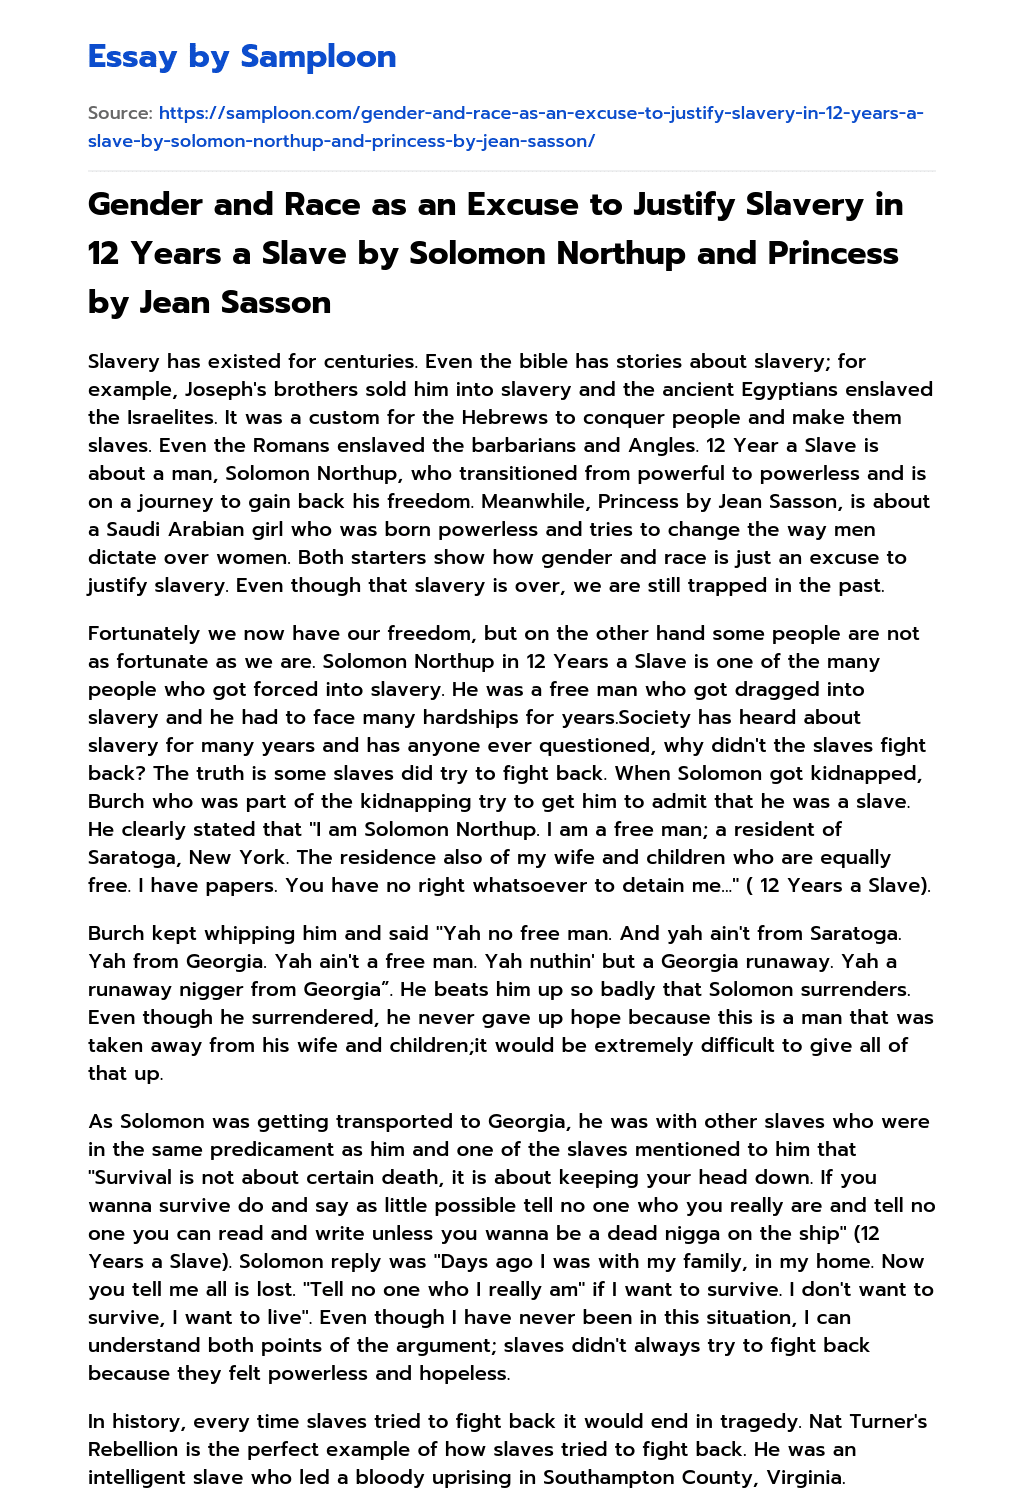 Gender and Race as an Excuse to Justify Slavery in 12 Years a Slave by Solomon Northup and Princess by Jean Sasson essay